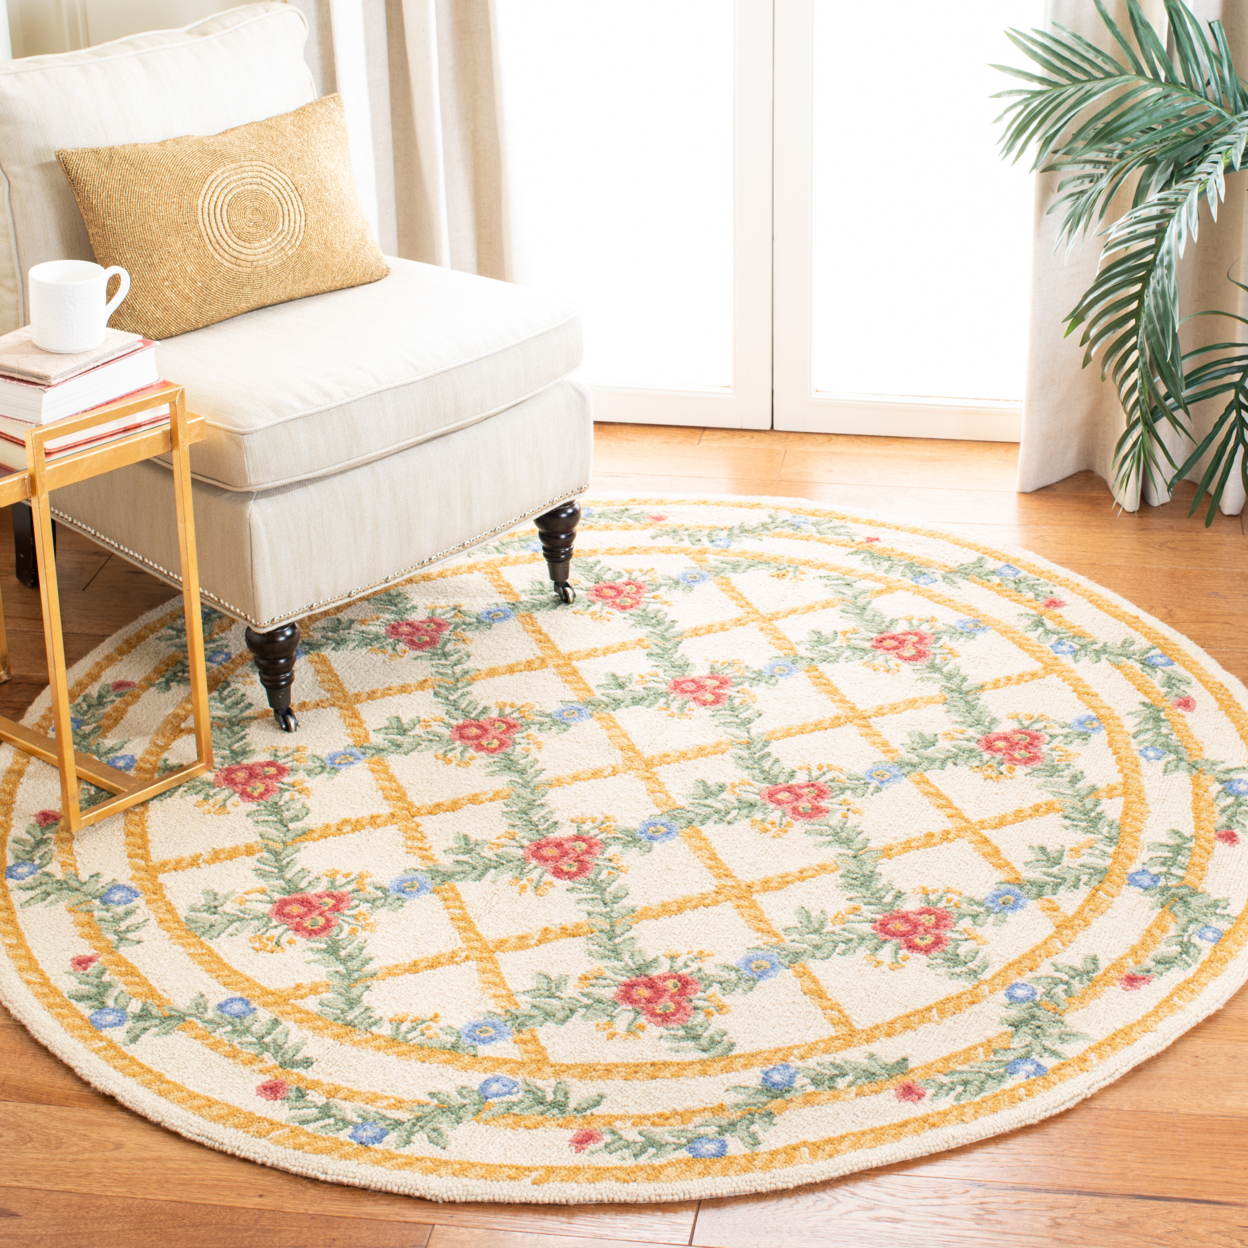 SAFAVIEH Chelsea Collection HK62A Hand-hooked Ivory Rug - 8' Round